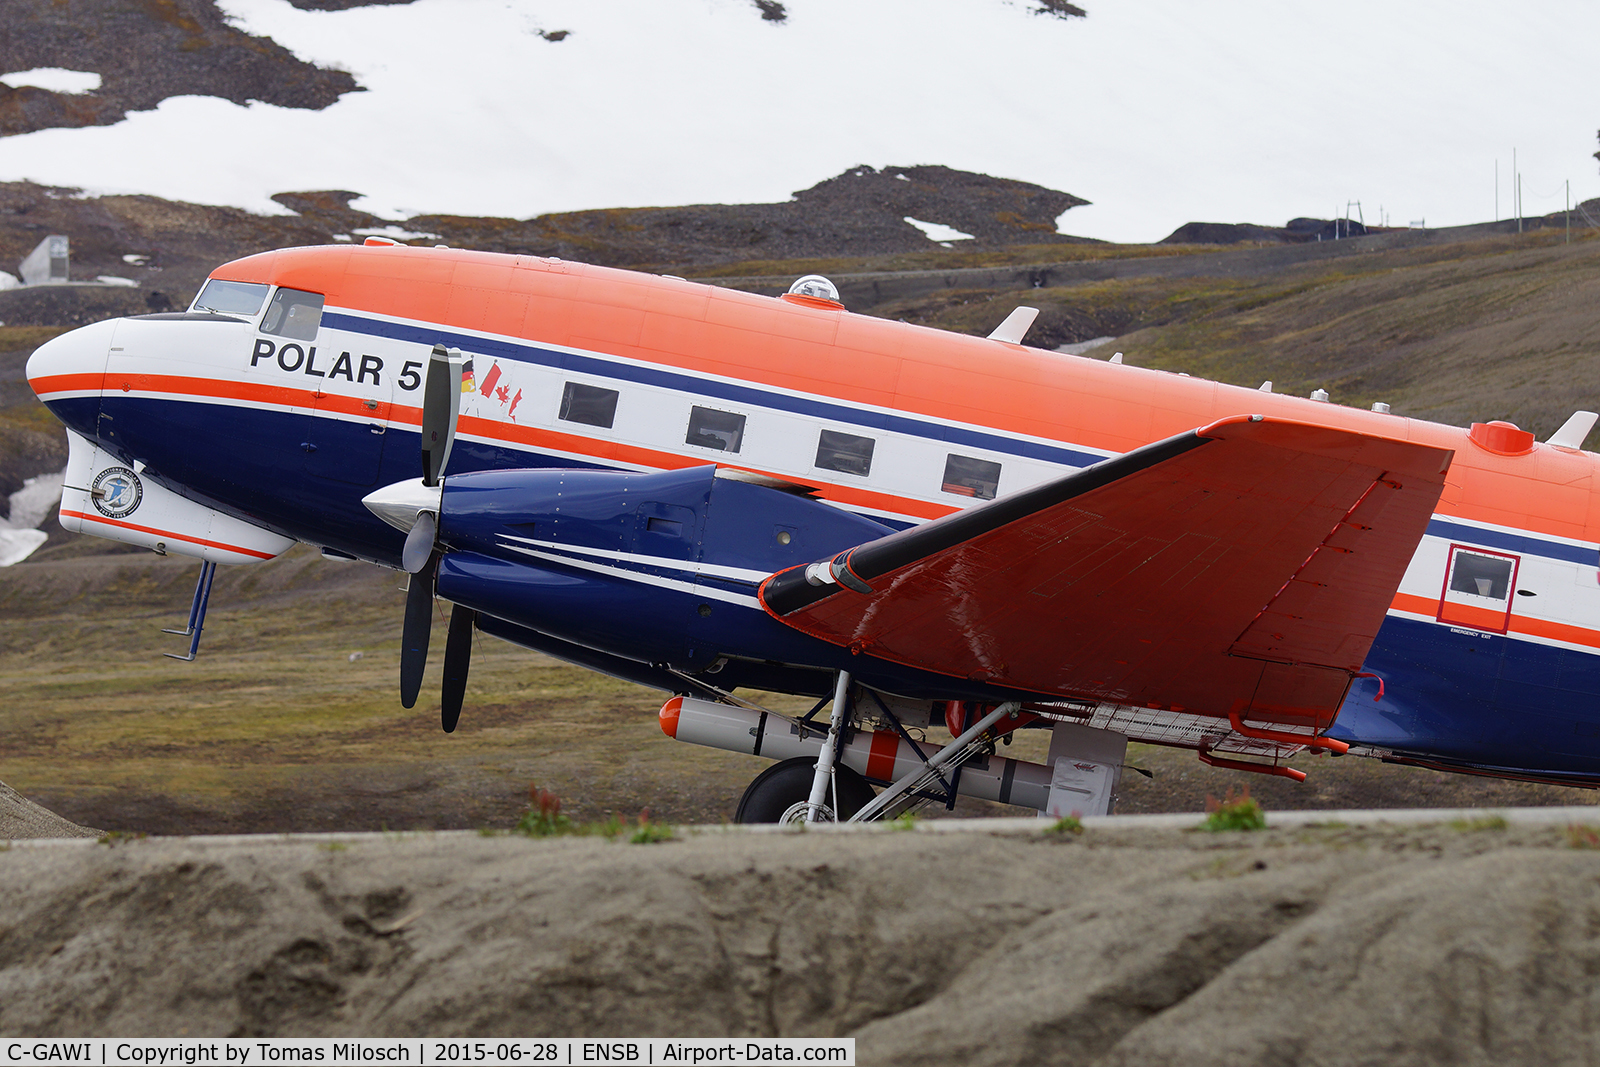 C-GAWI, 1943 Douglas DC3C-S4C4G C/N 19227, Polar 5 in the polar region at the airport of Longyearbyen, latitude 78°. The arctic circle is at 66°.